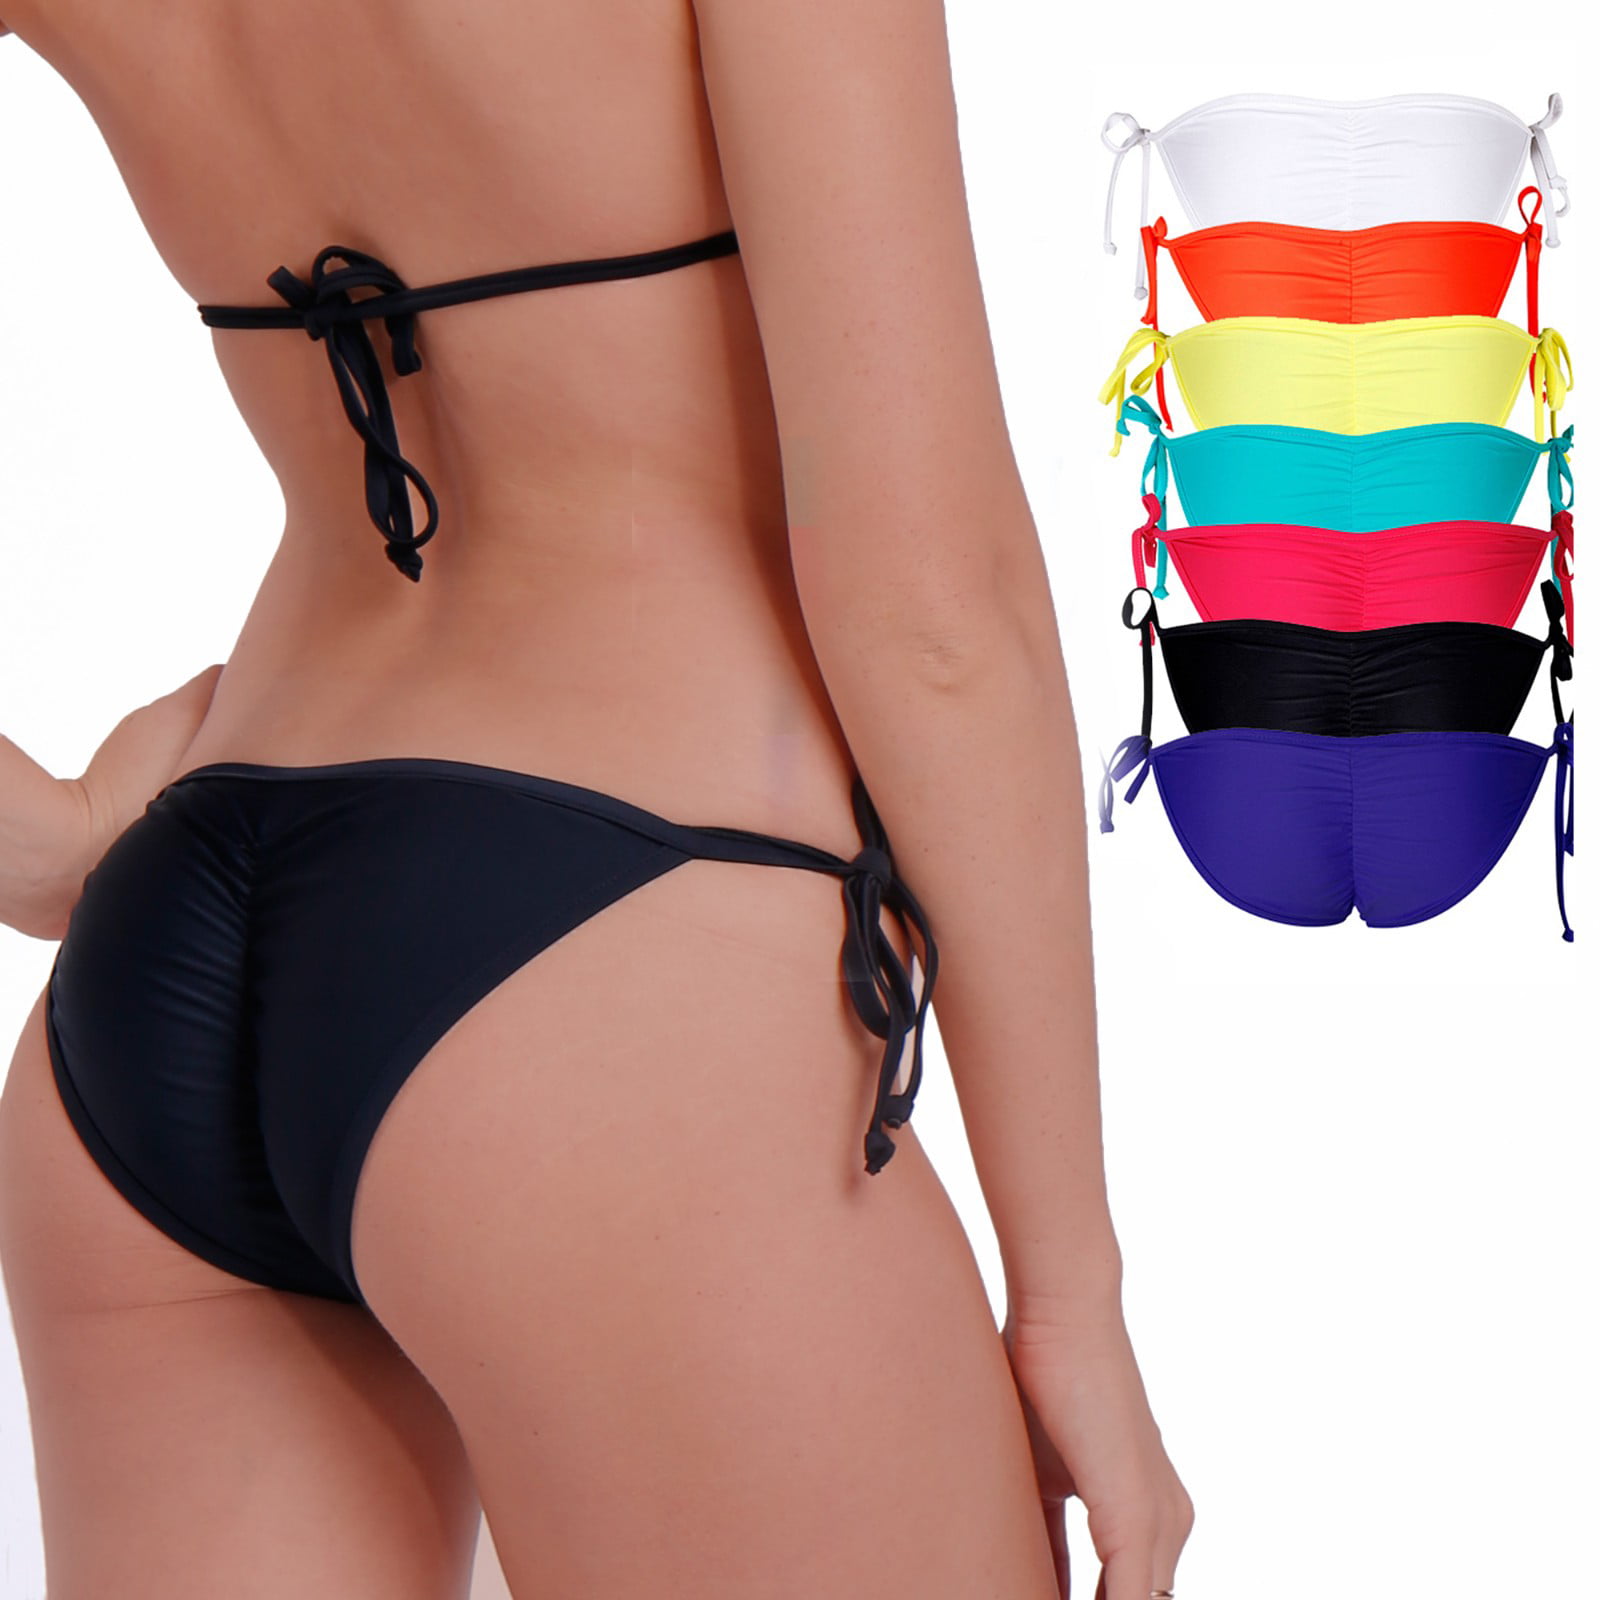 FITTOO Women Long Sleeve UV Protection Bikini Sets Low Rise Swimsuits Color Block Thong Bottoms Swimwear